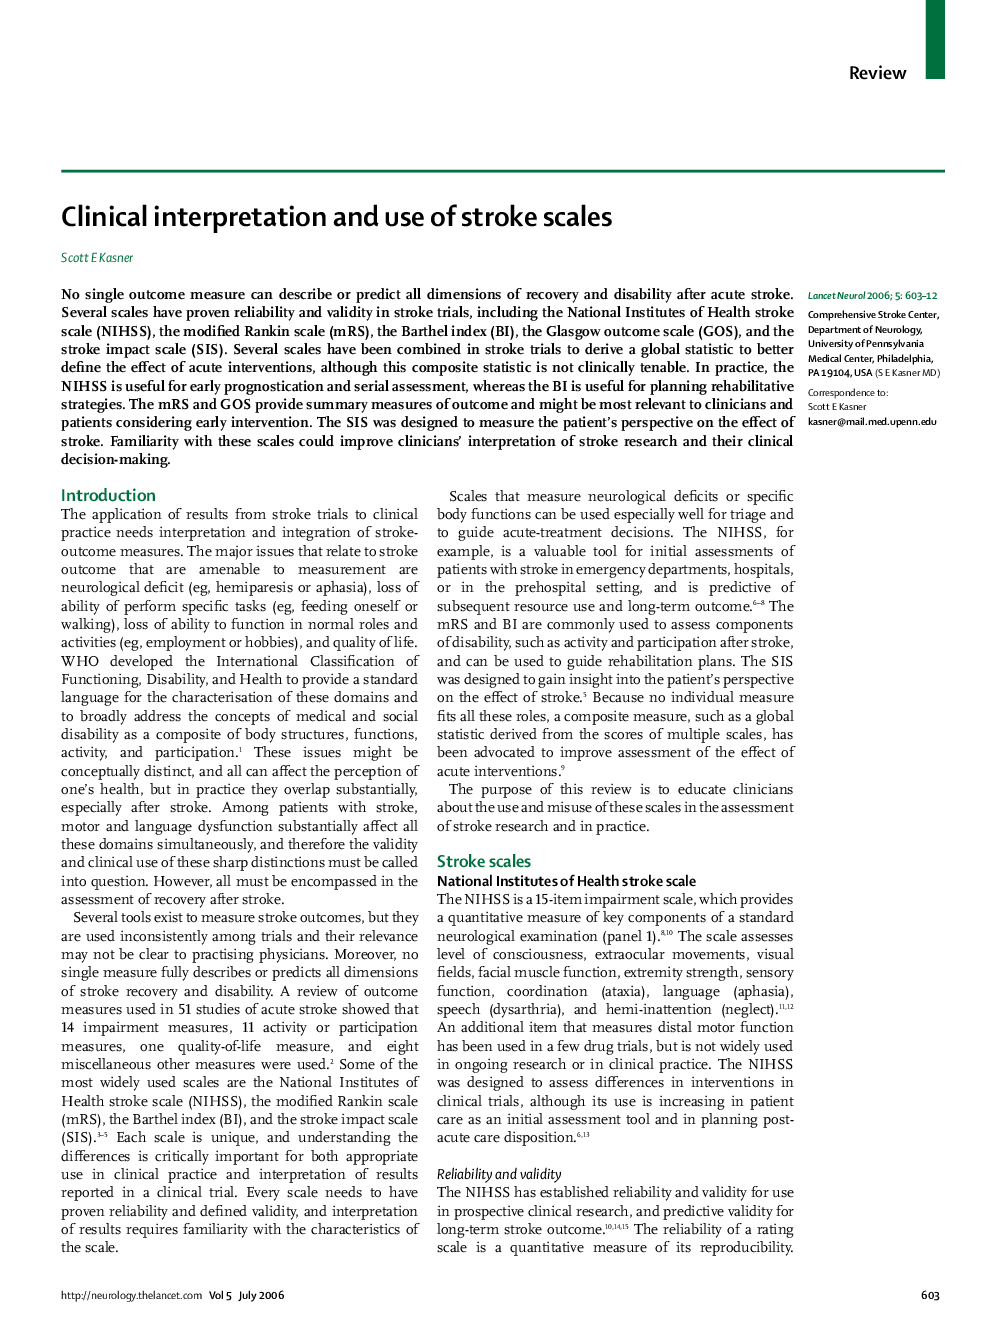 Clinical interpretation and use of stroke scales